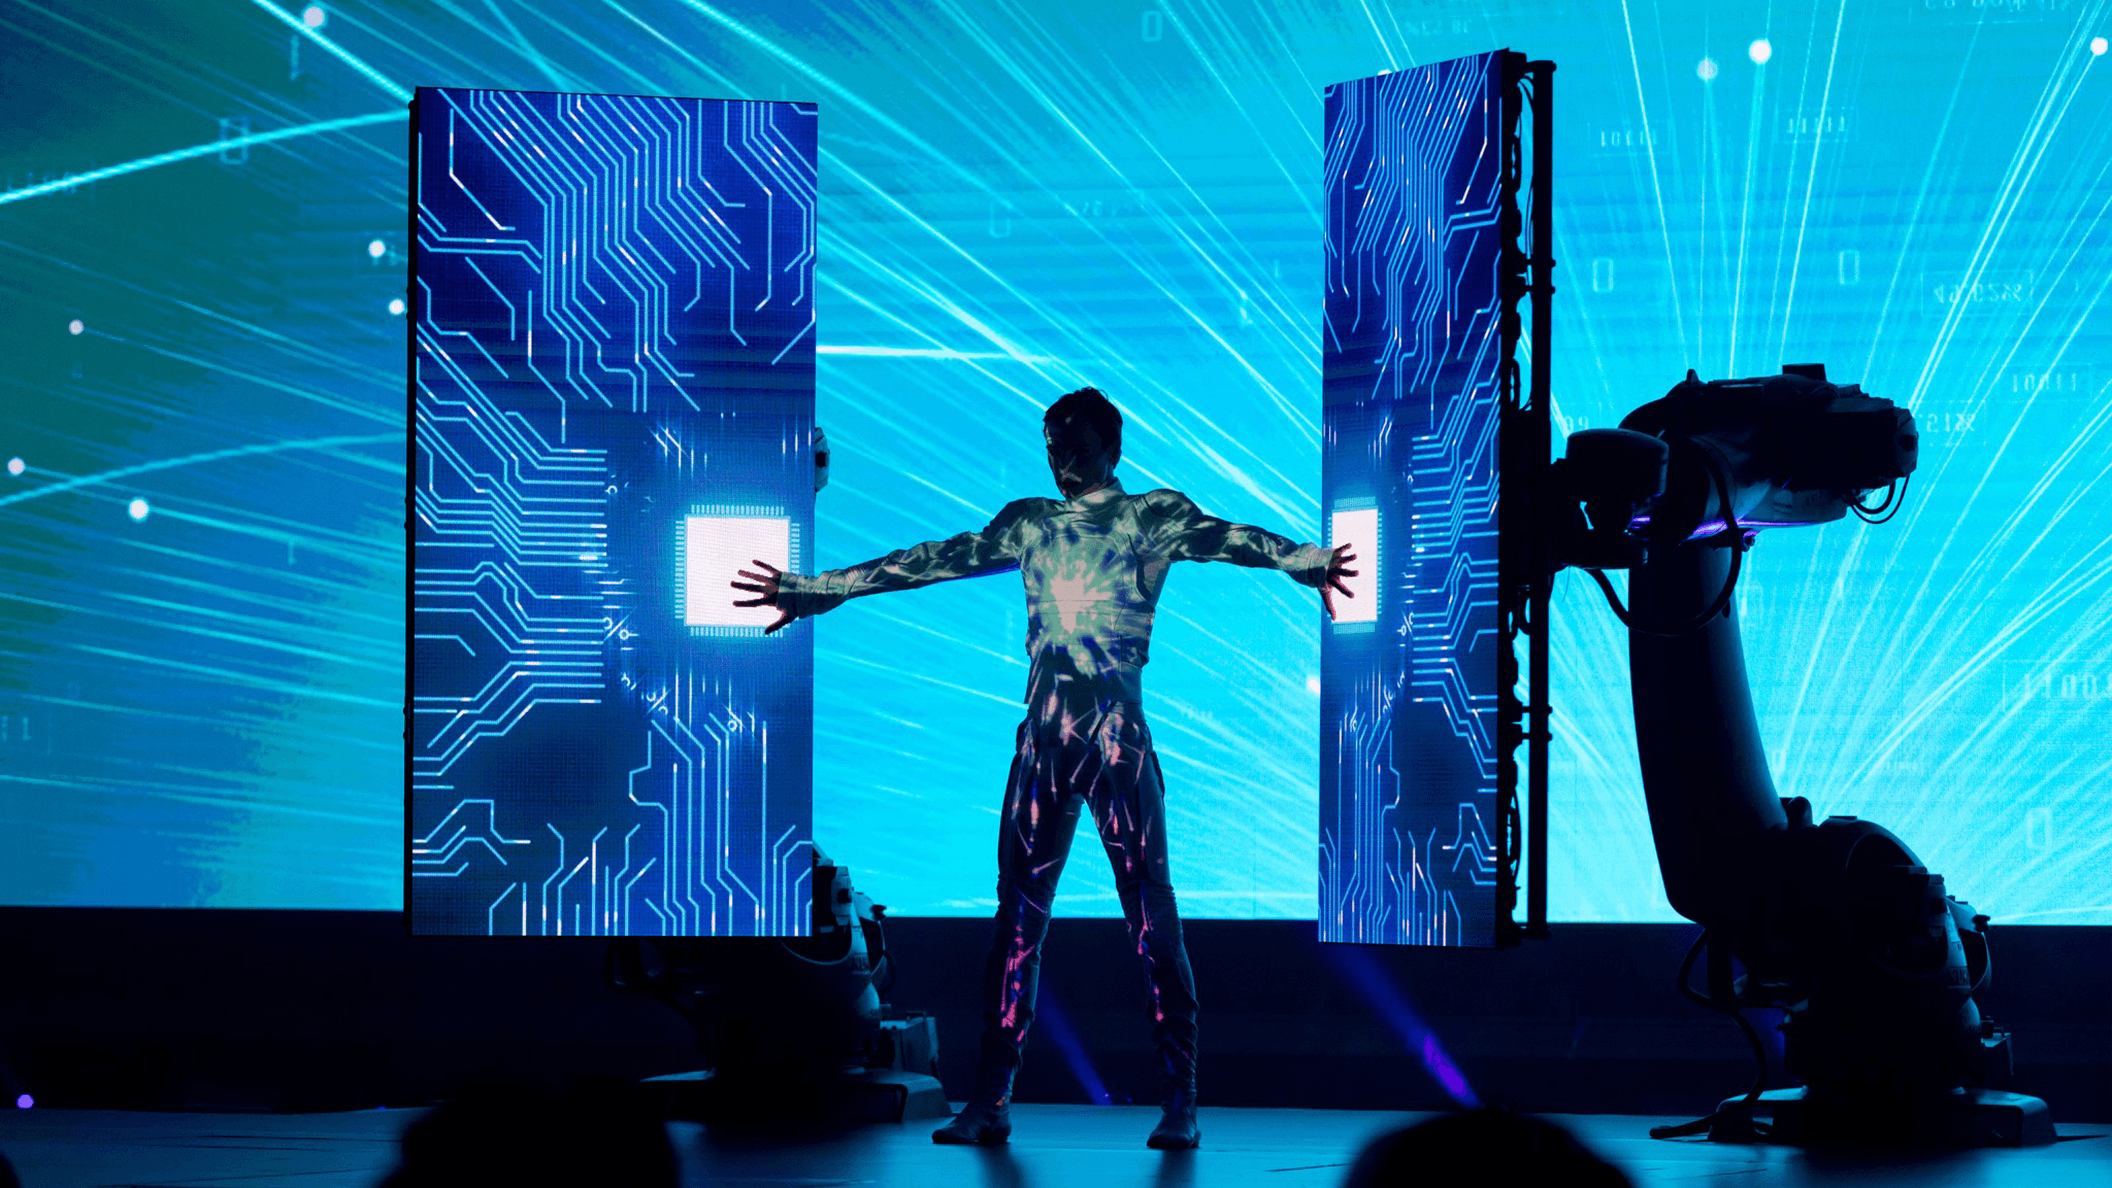 A performer interacts with LED screens during a multimedia performance at the Global AI Summit 2022